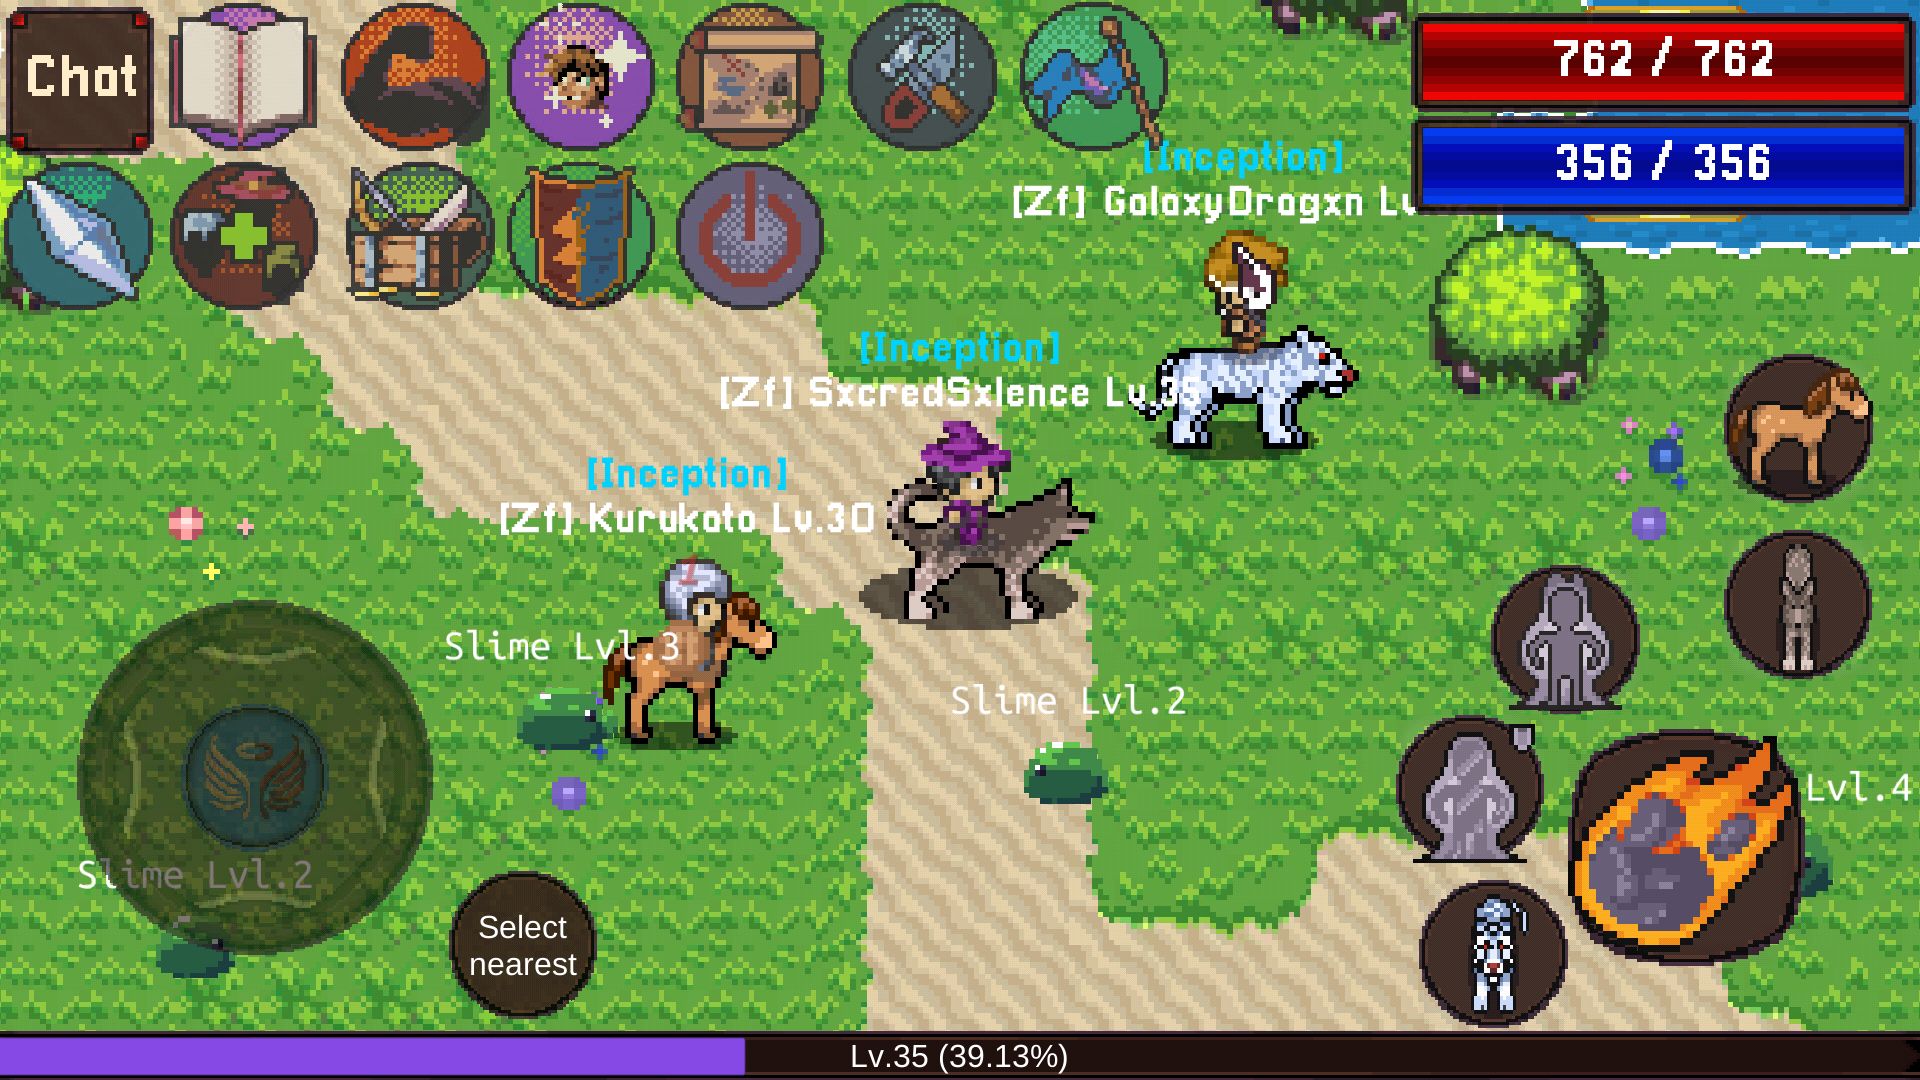 Full version of Android MMORPGs game apk Elysium Online - MMORPG (Alpha) for tablet and phone.